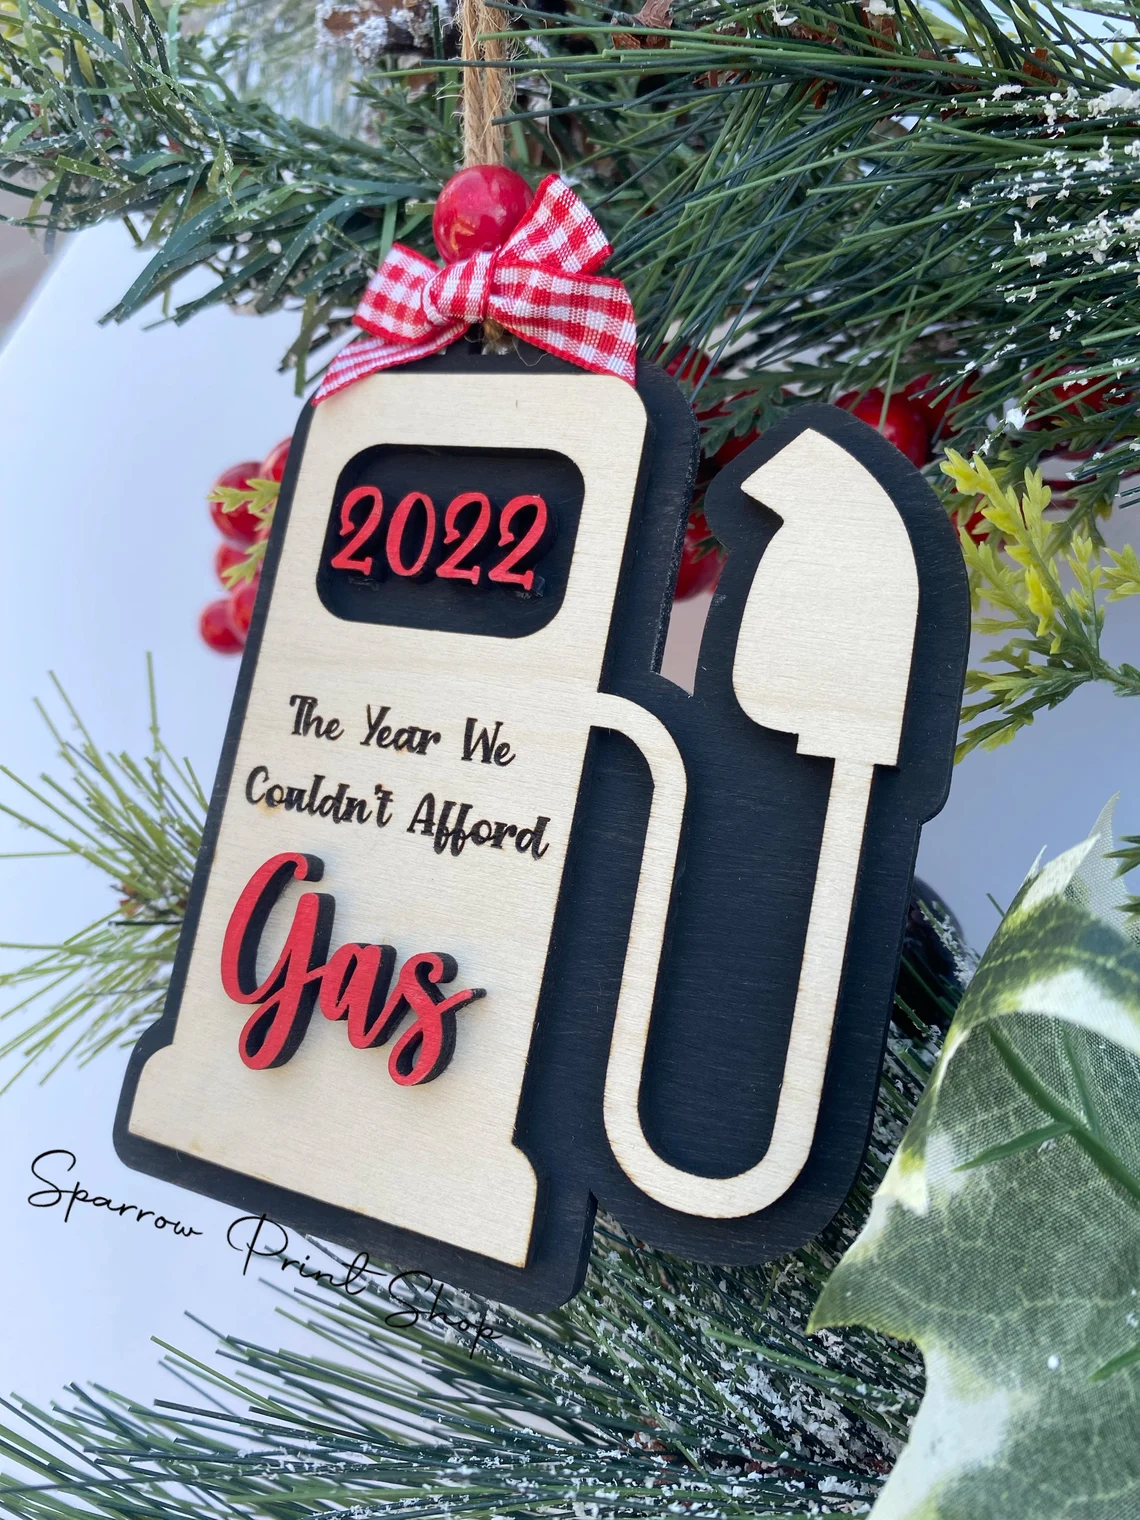 2022 Christmas Ornament- The Year We Couldn't Afford Gas